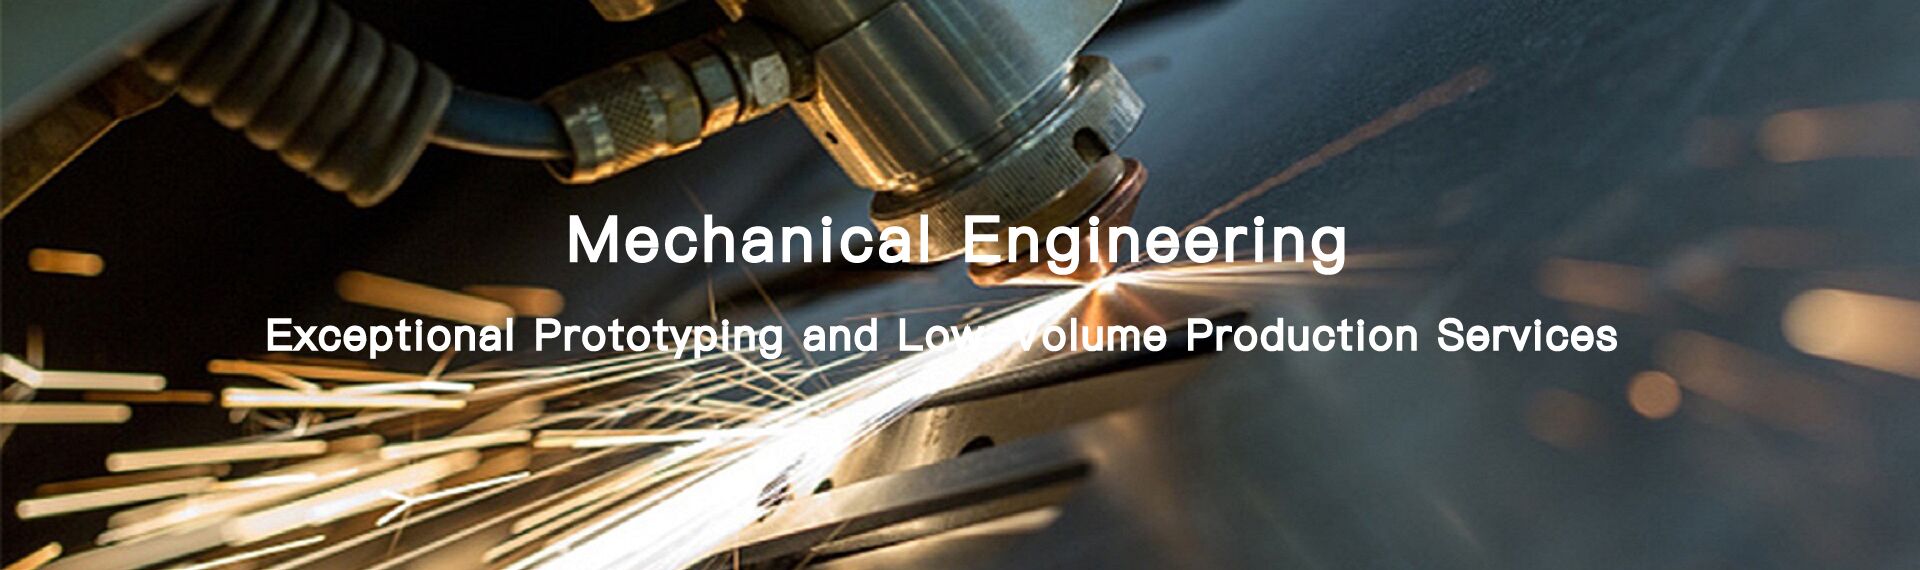 CNC Machining service, rapid prototyping and metal sheet fabrication, precision machining services.